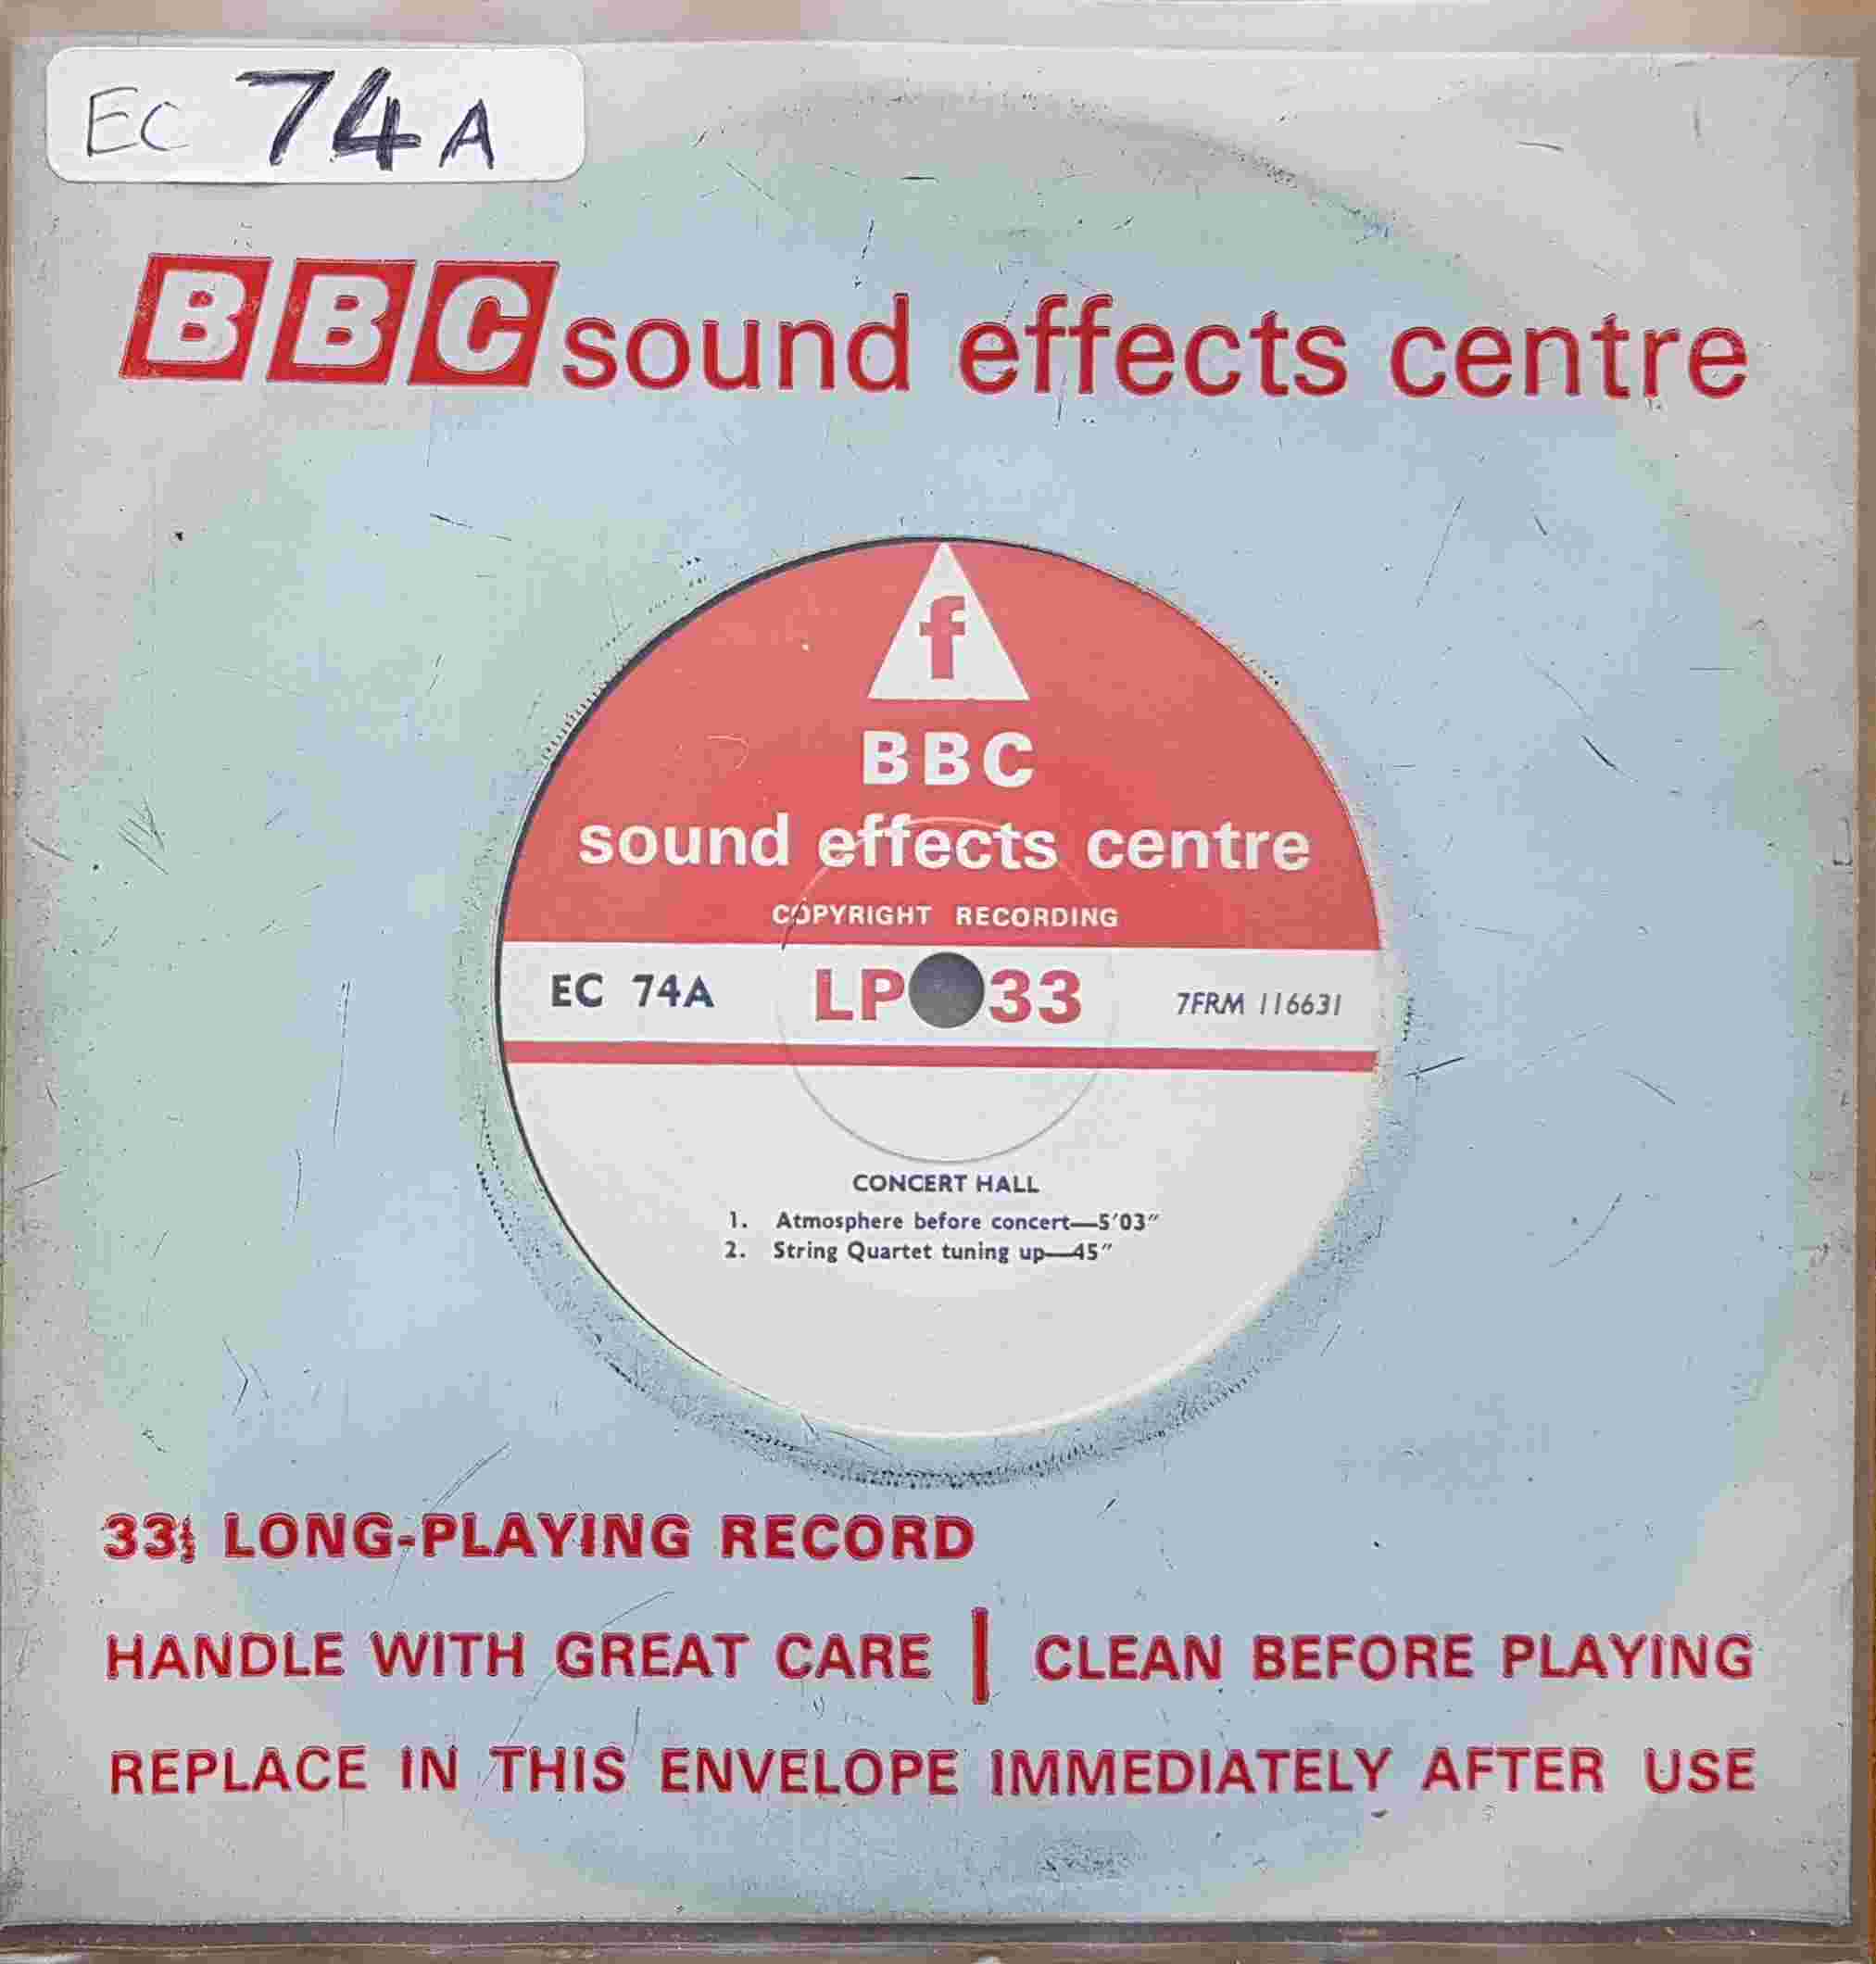 Picture of EC 74A Concert hall single by artist Not registered from the BBC records and Tapes library